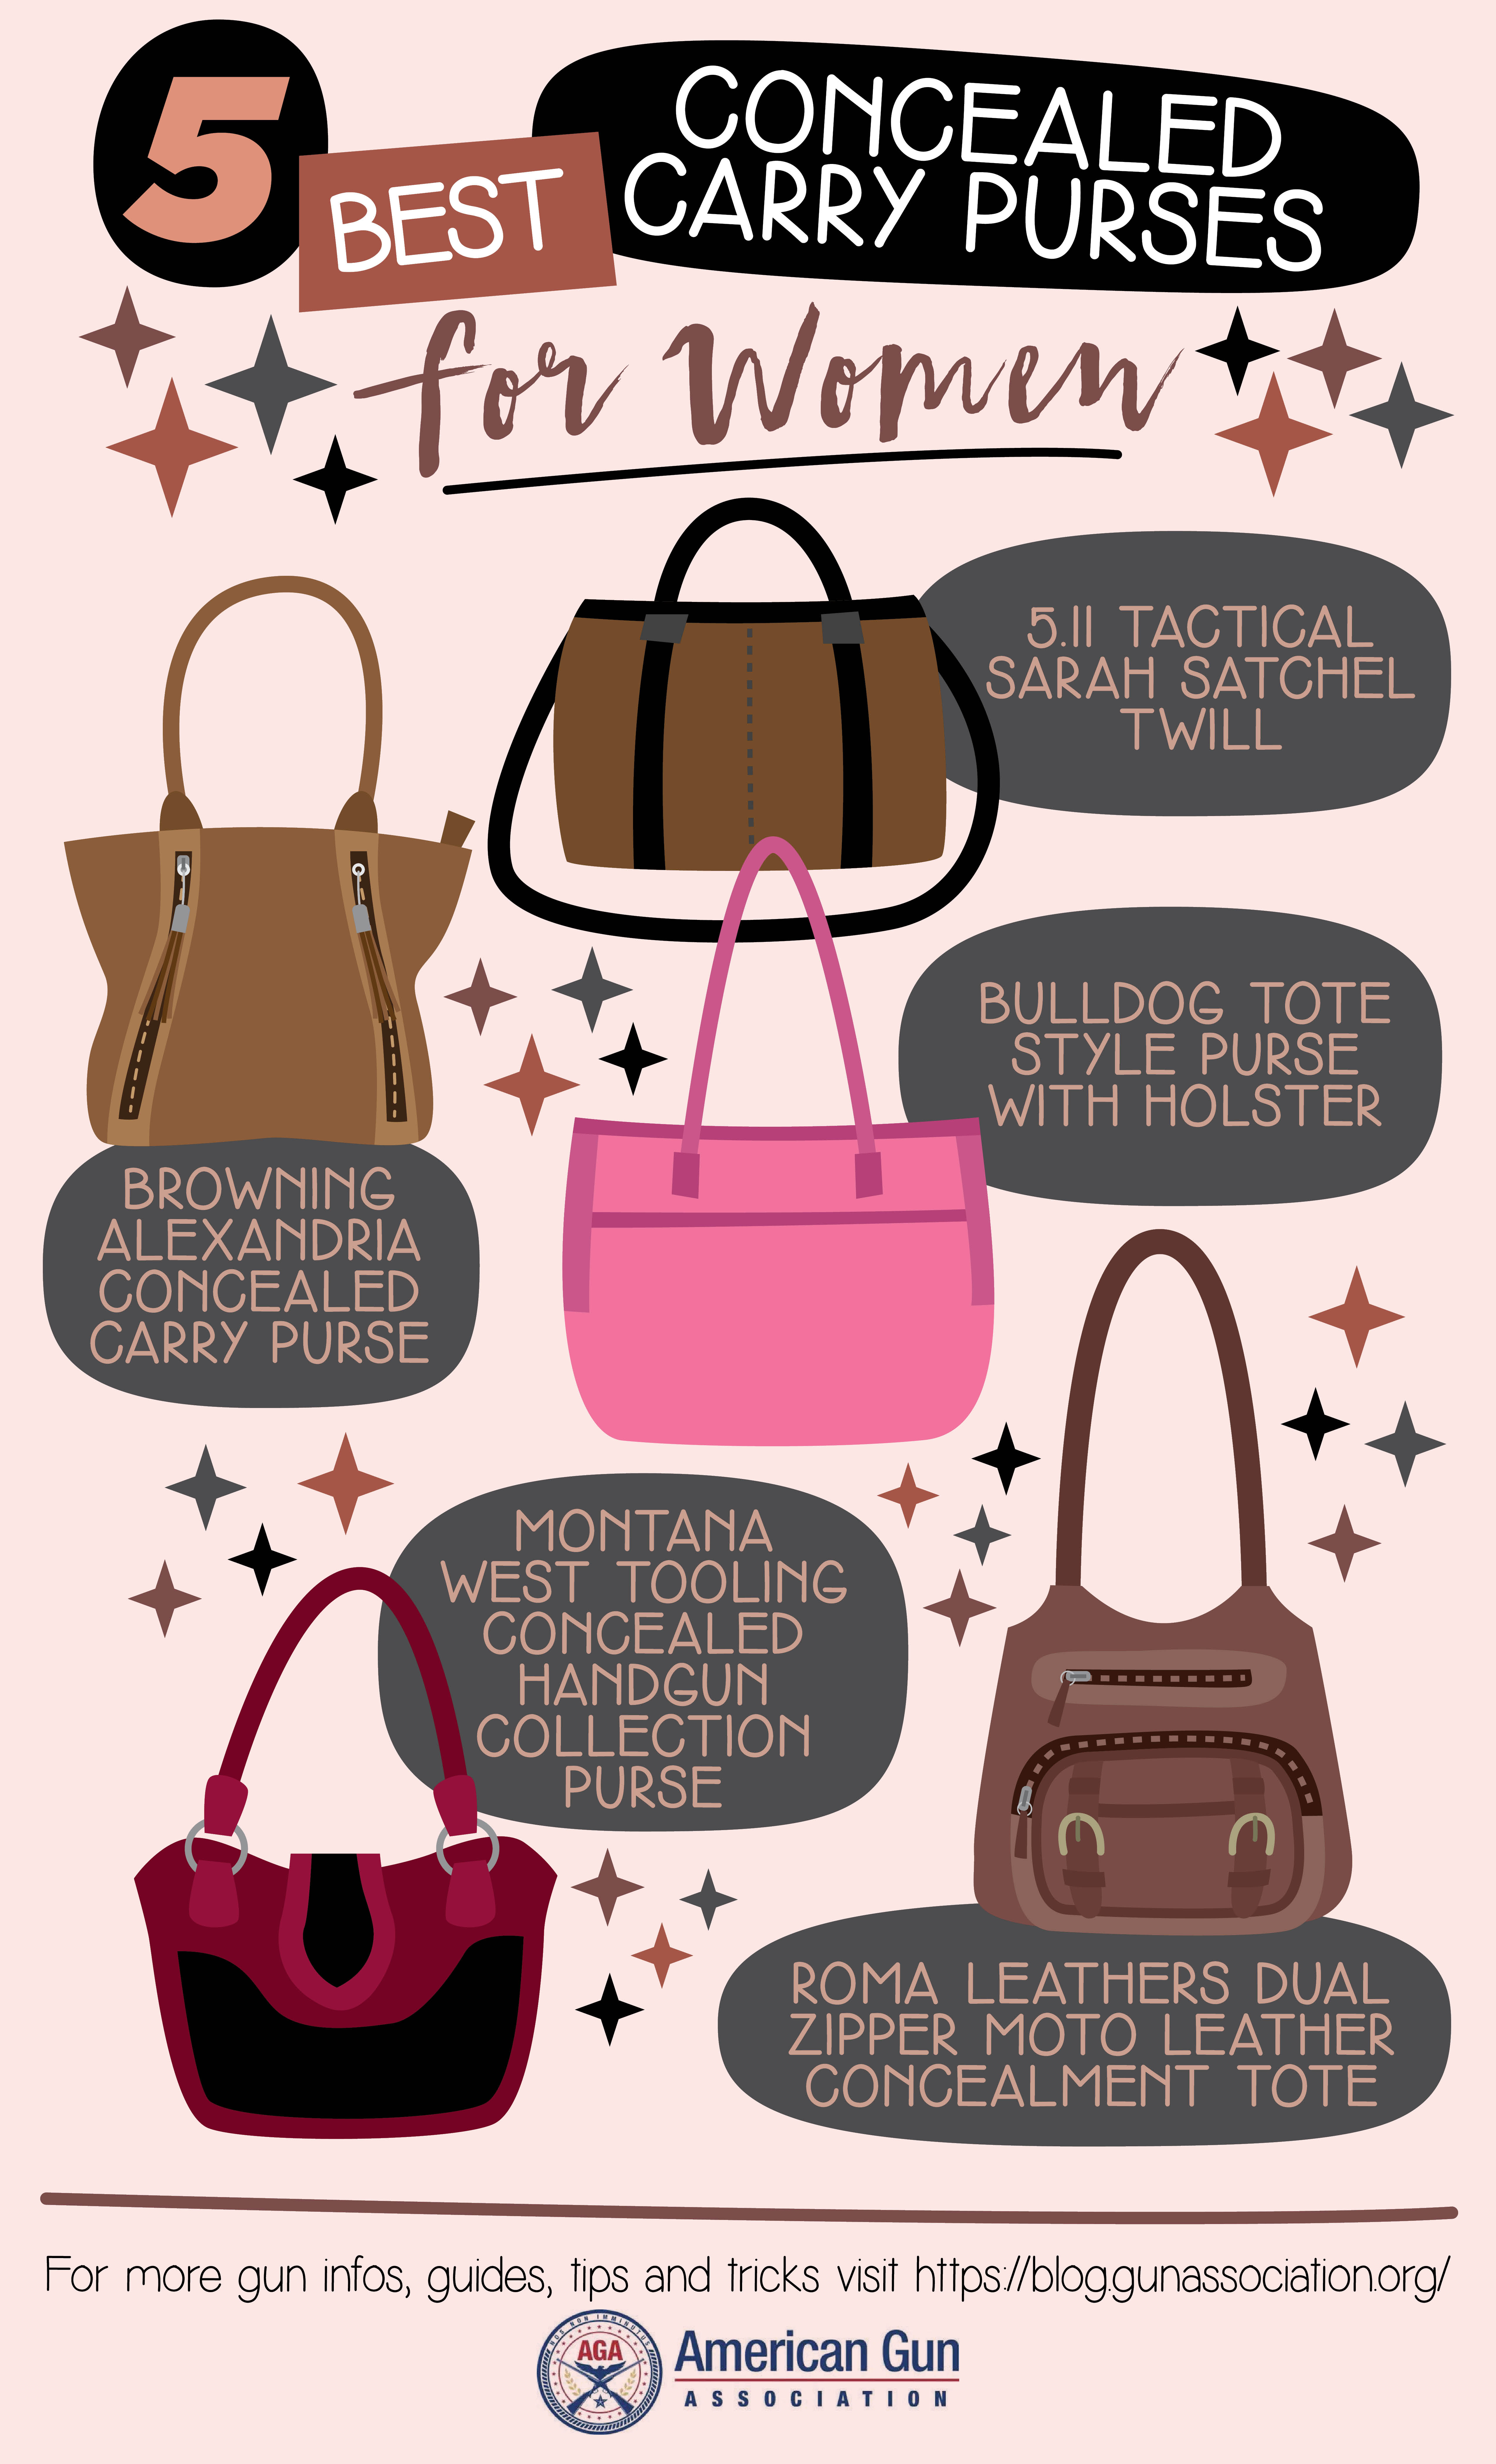 5 Best Concealed Carry Purses For Women | infographics